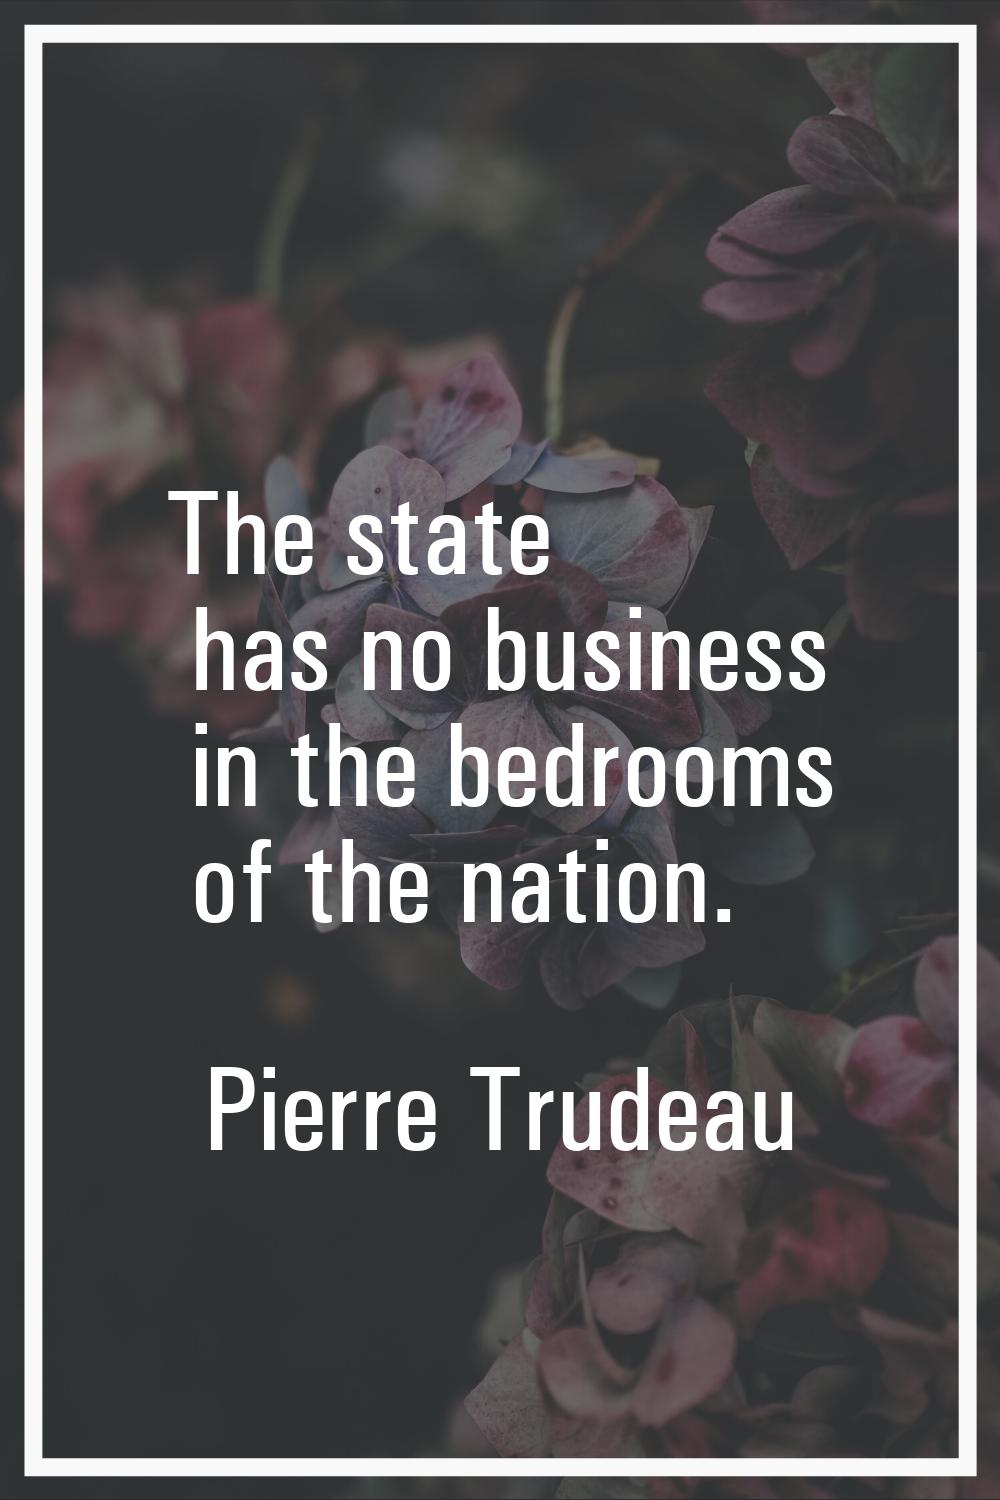 The state has no business in the bedrooms of the nation.